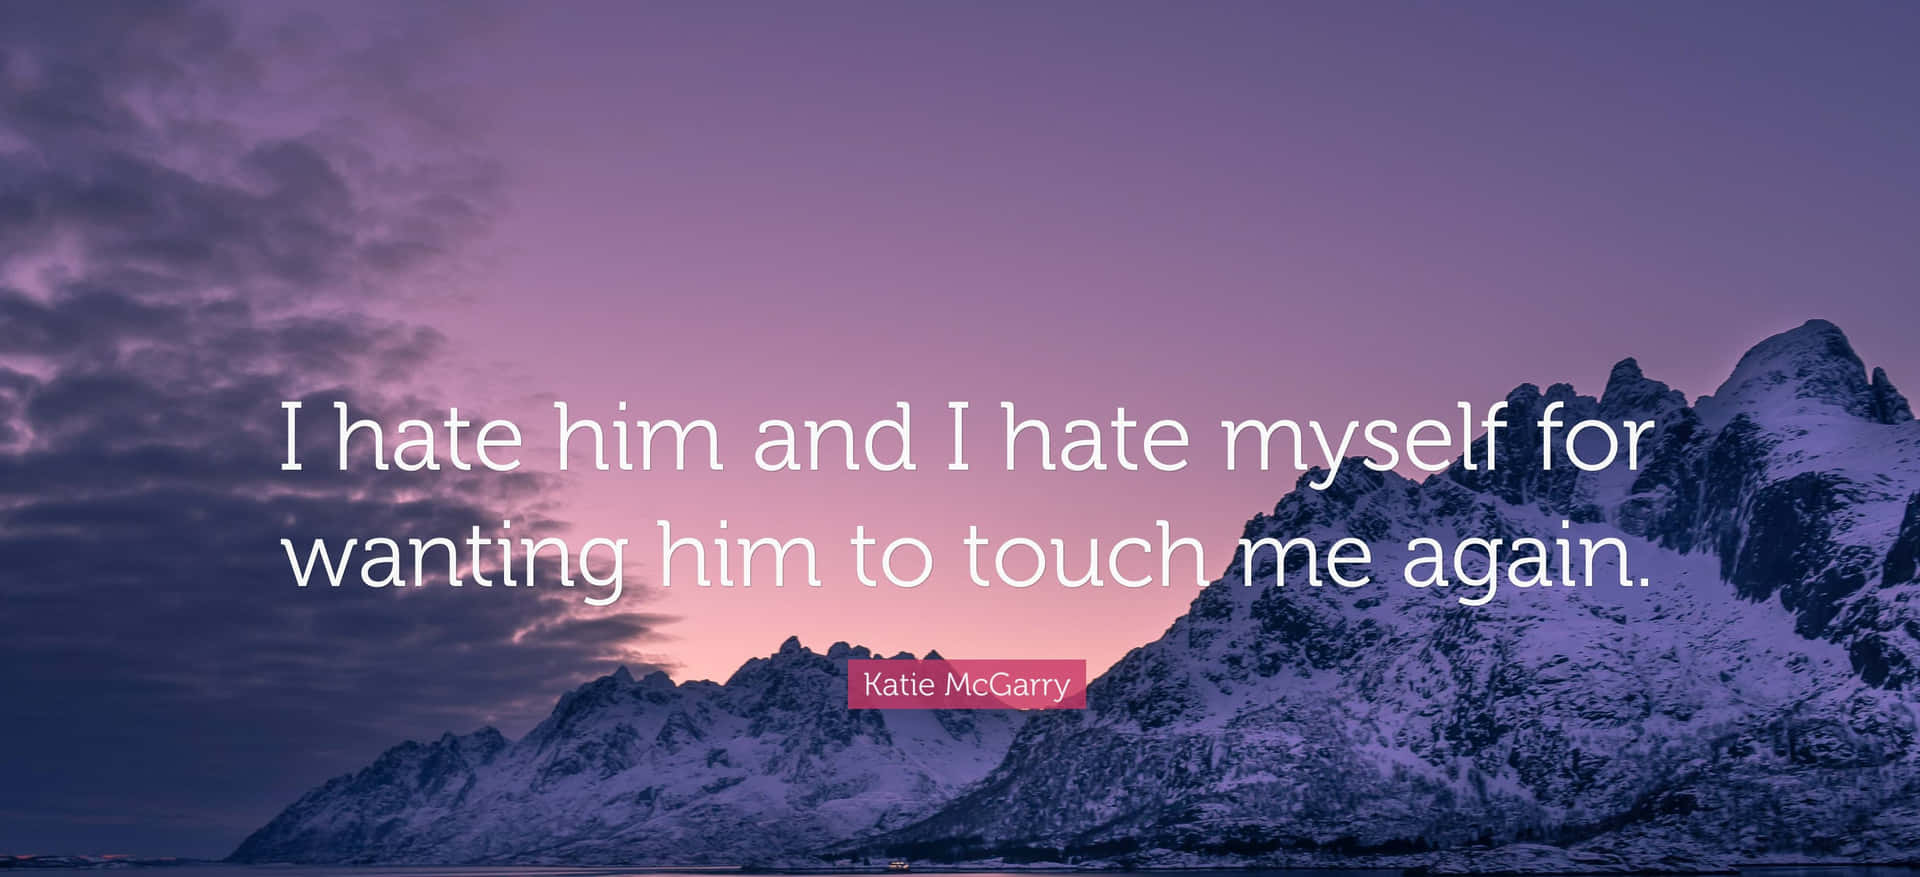 A Quote That Says I Hate Him And Hate Myself For Wanting Him To Touch Me Again Wallpaper